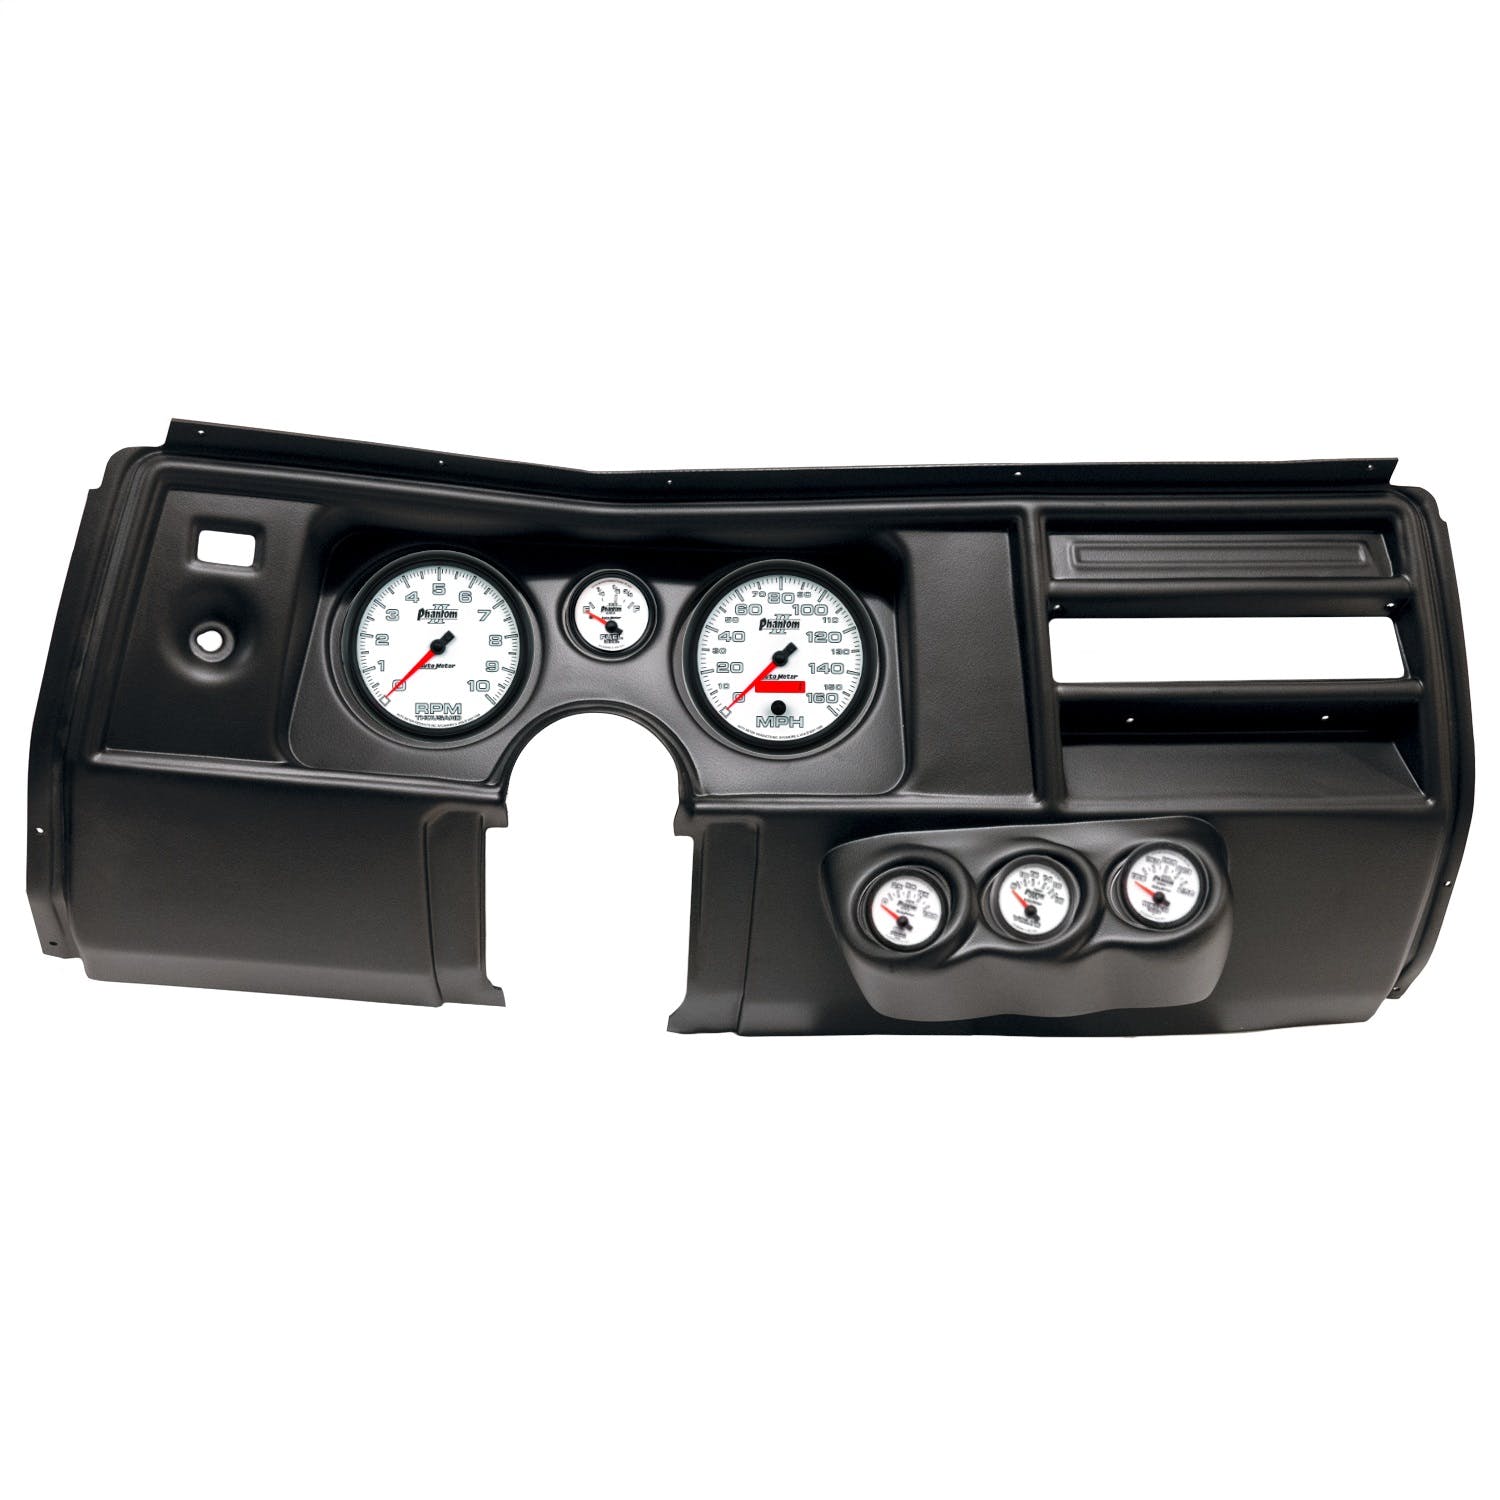 AutoMeter Products 2910-10 6 Gauge Direct-Fit Dash Kit, Chevy Chevelle No Vent 69, Phantom II